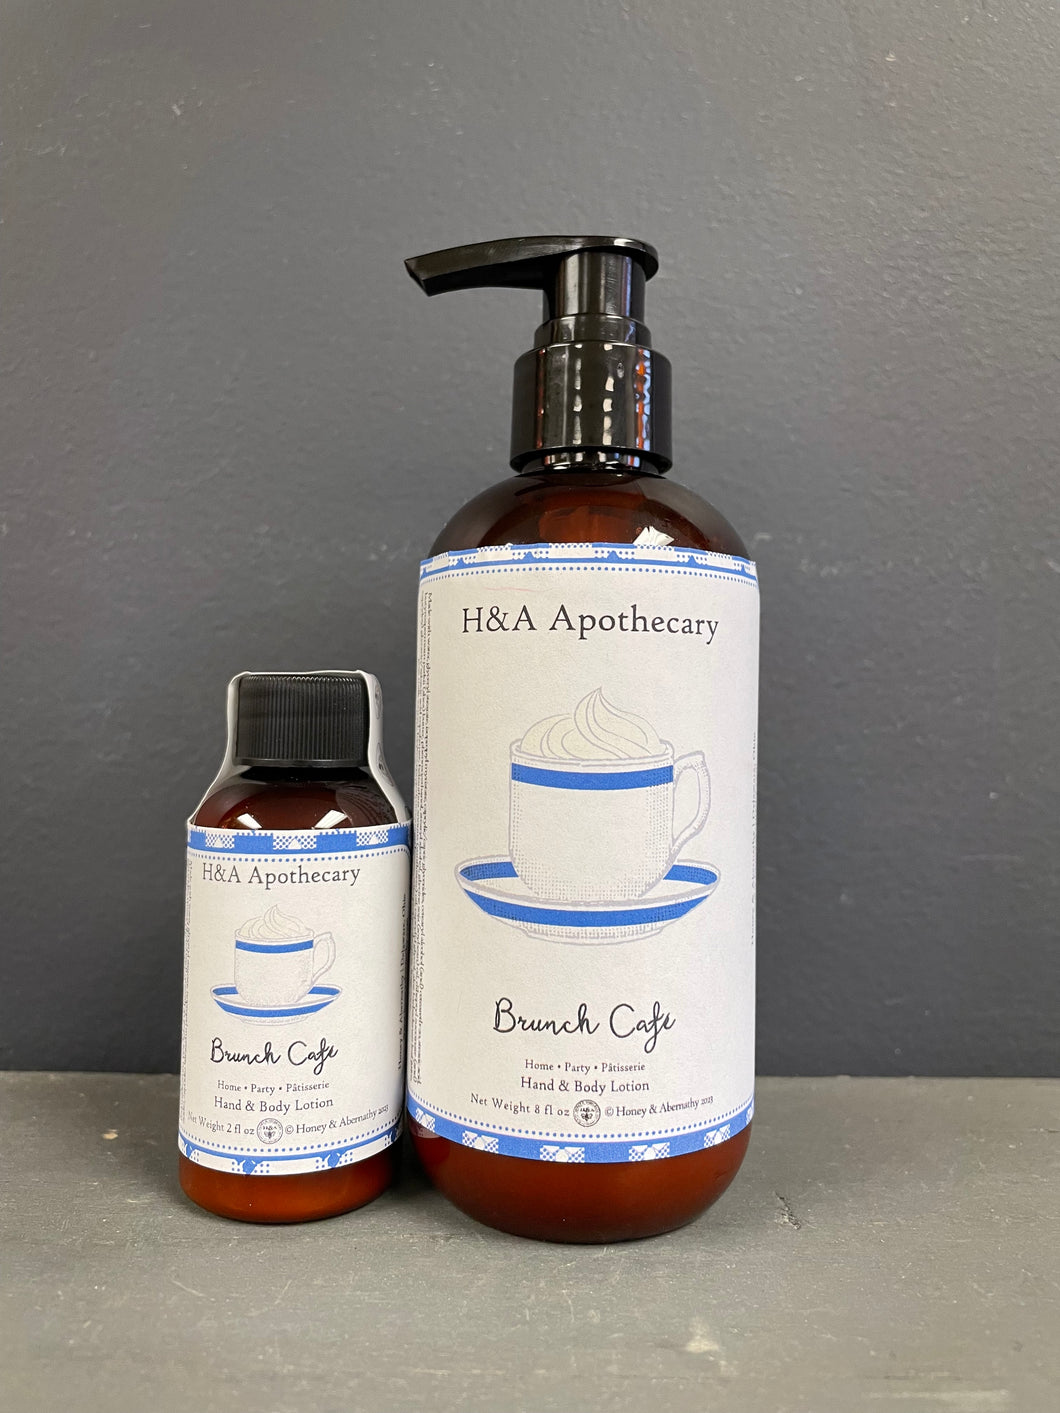 H&A Apothecary Brunch Cafe Hand & Body Lotion